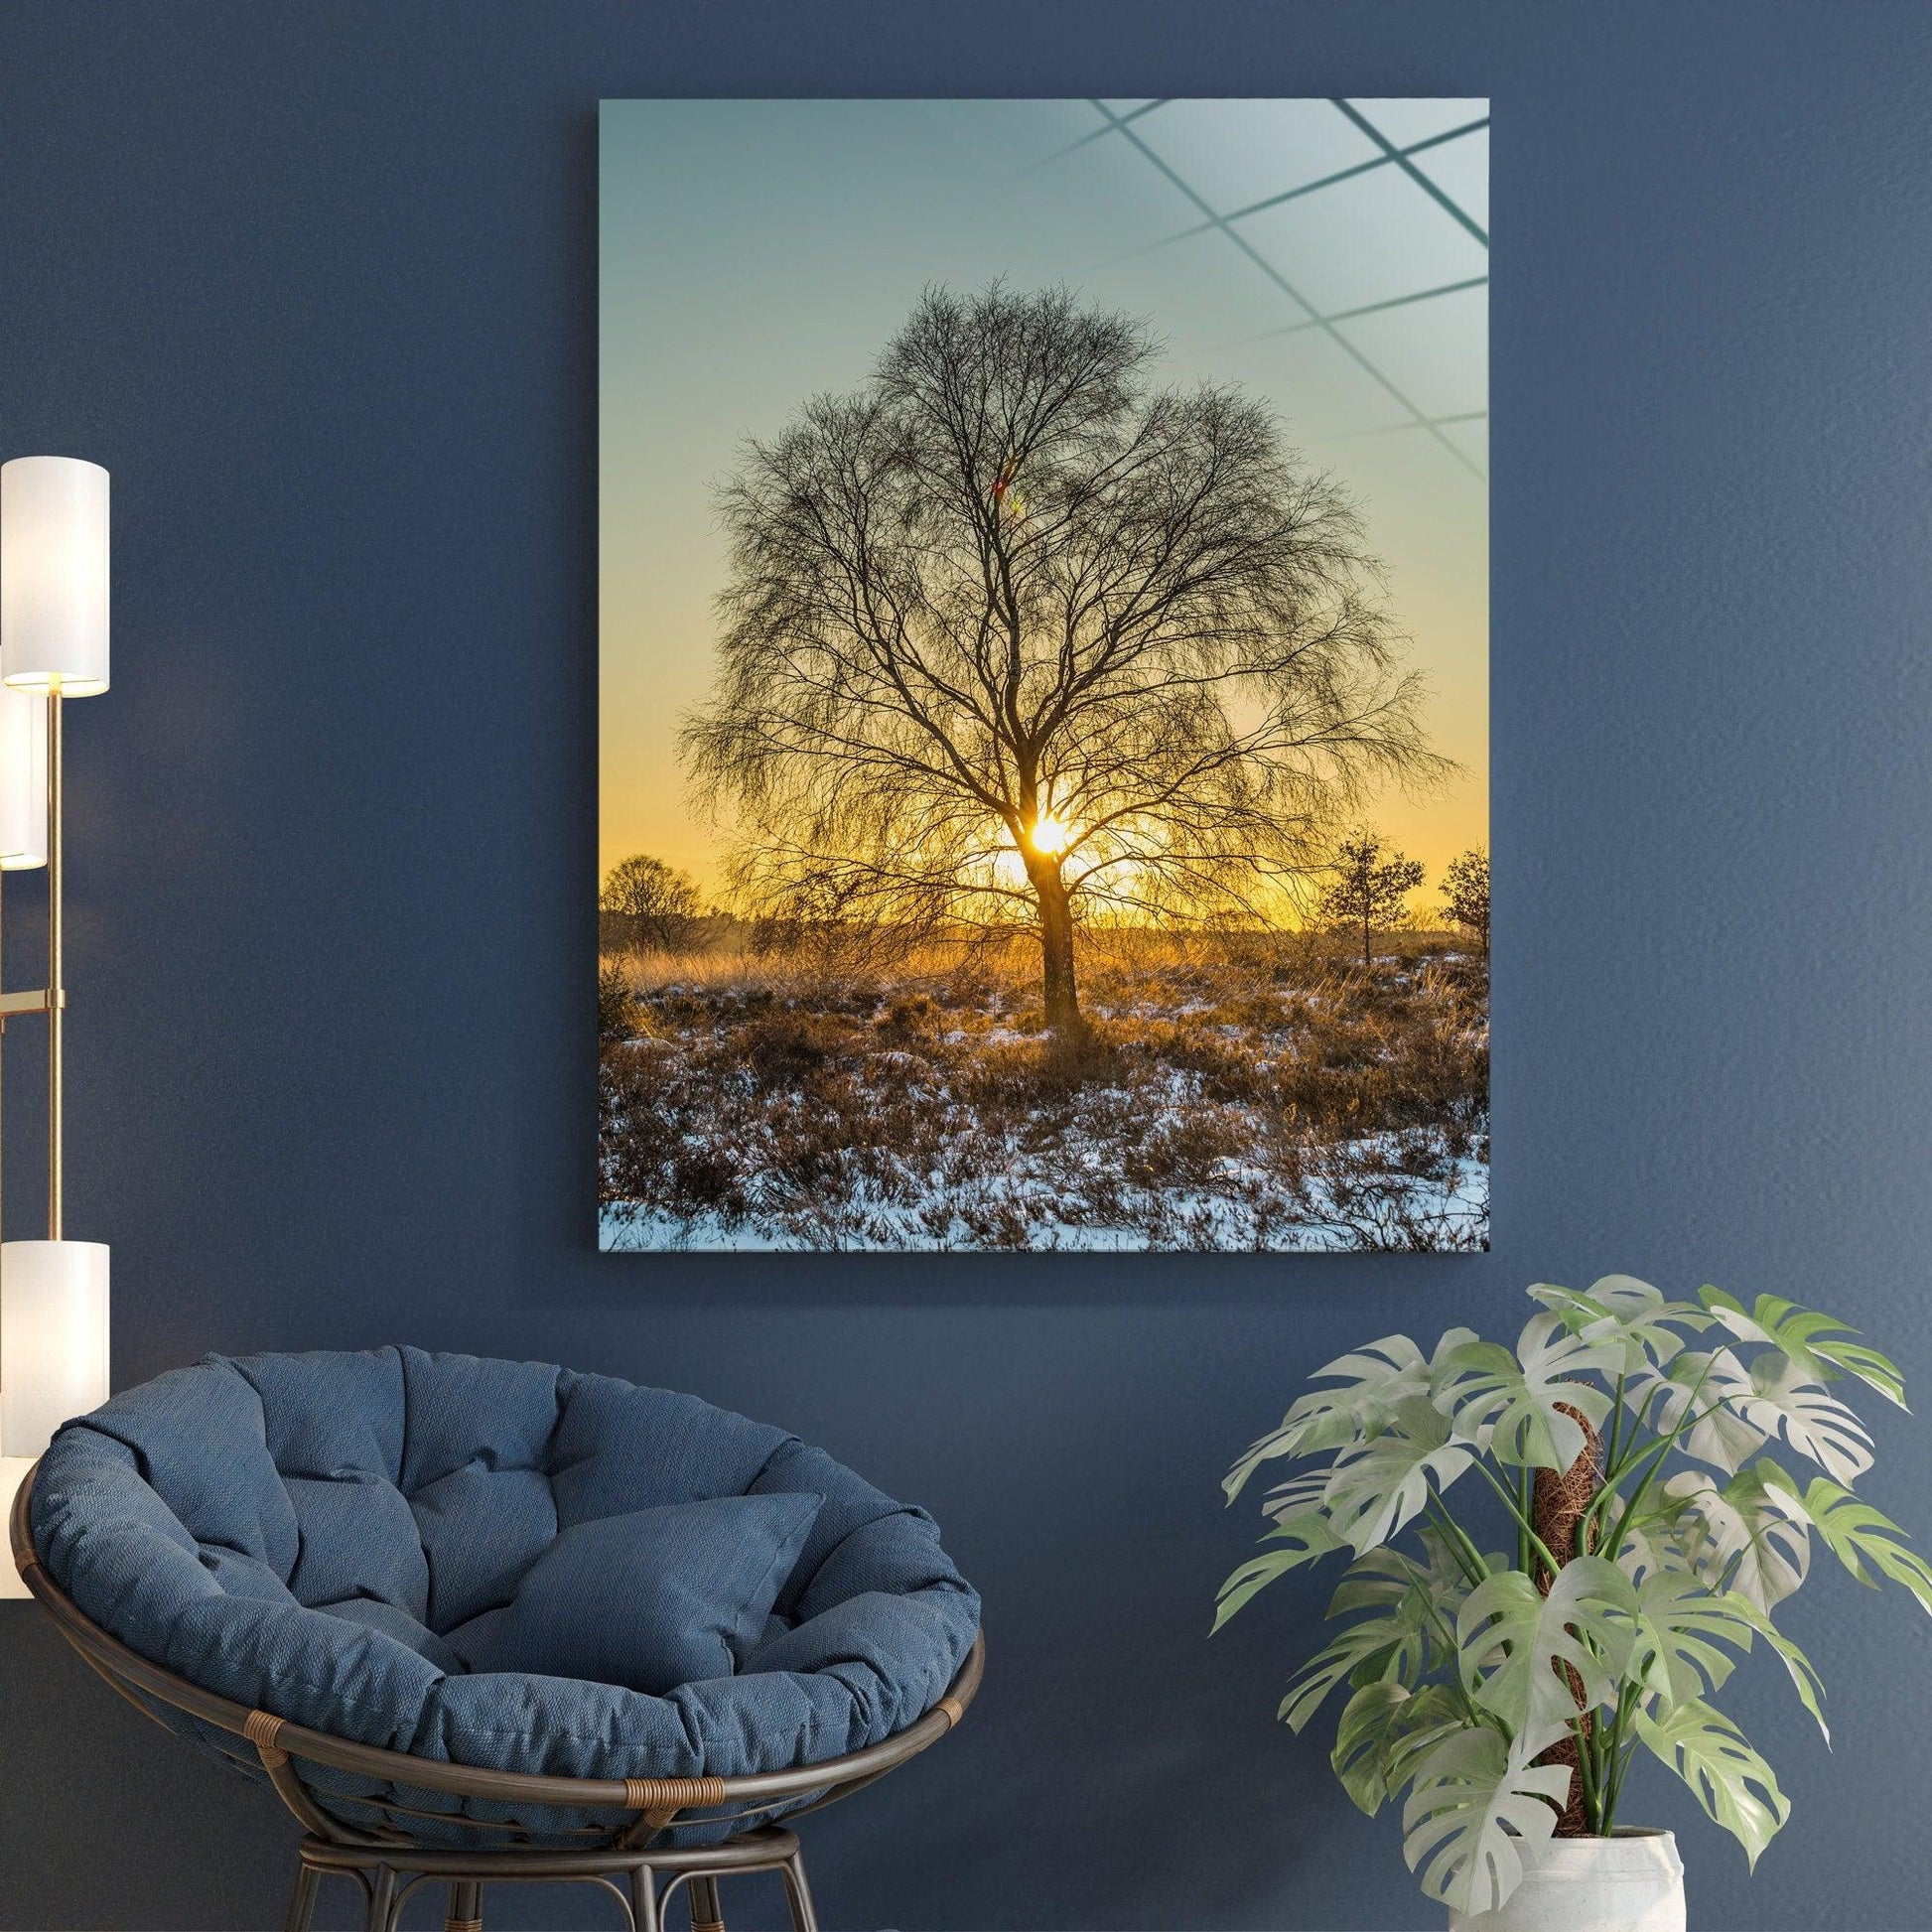 Tree Image canvas wall art | Great Gift, National Geographic Quality Photo, Tree Wall Decor, Home Decoration, Tree and Sun glass wall art